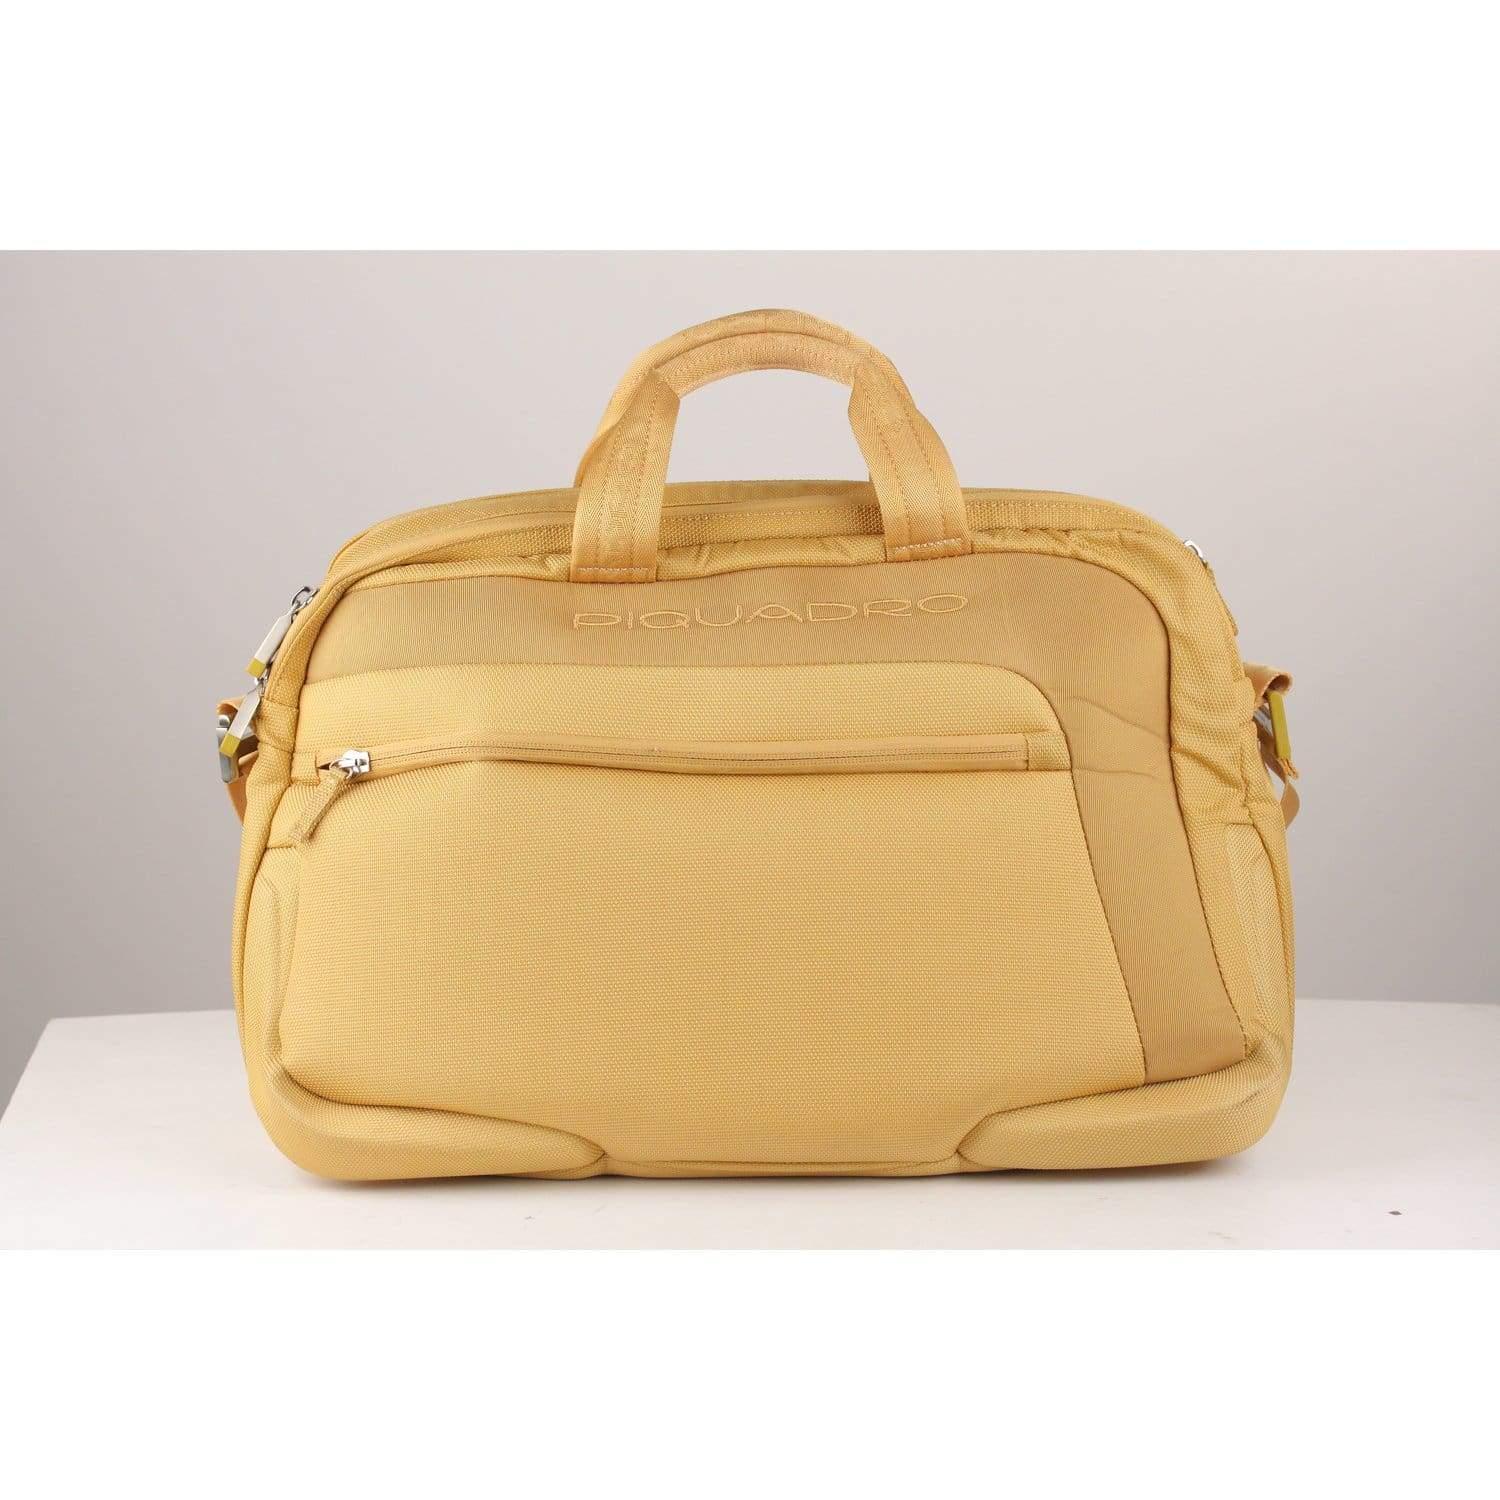 MATERIAL: Canvas COLOR: Yellow MODEL: Briefcase GENDER: Women, Men SIZE: Large Condition CONDITION DETAILS: B :GOOD CONDITION - Some light wear of use - some darkness on bottom corners Measurements MEASUREMENTS: BAG HEIGHT: 11.5 inches - 29,2 cm BAG